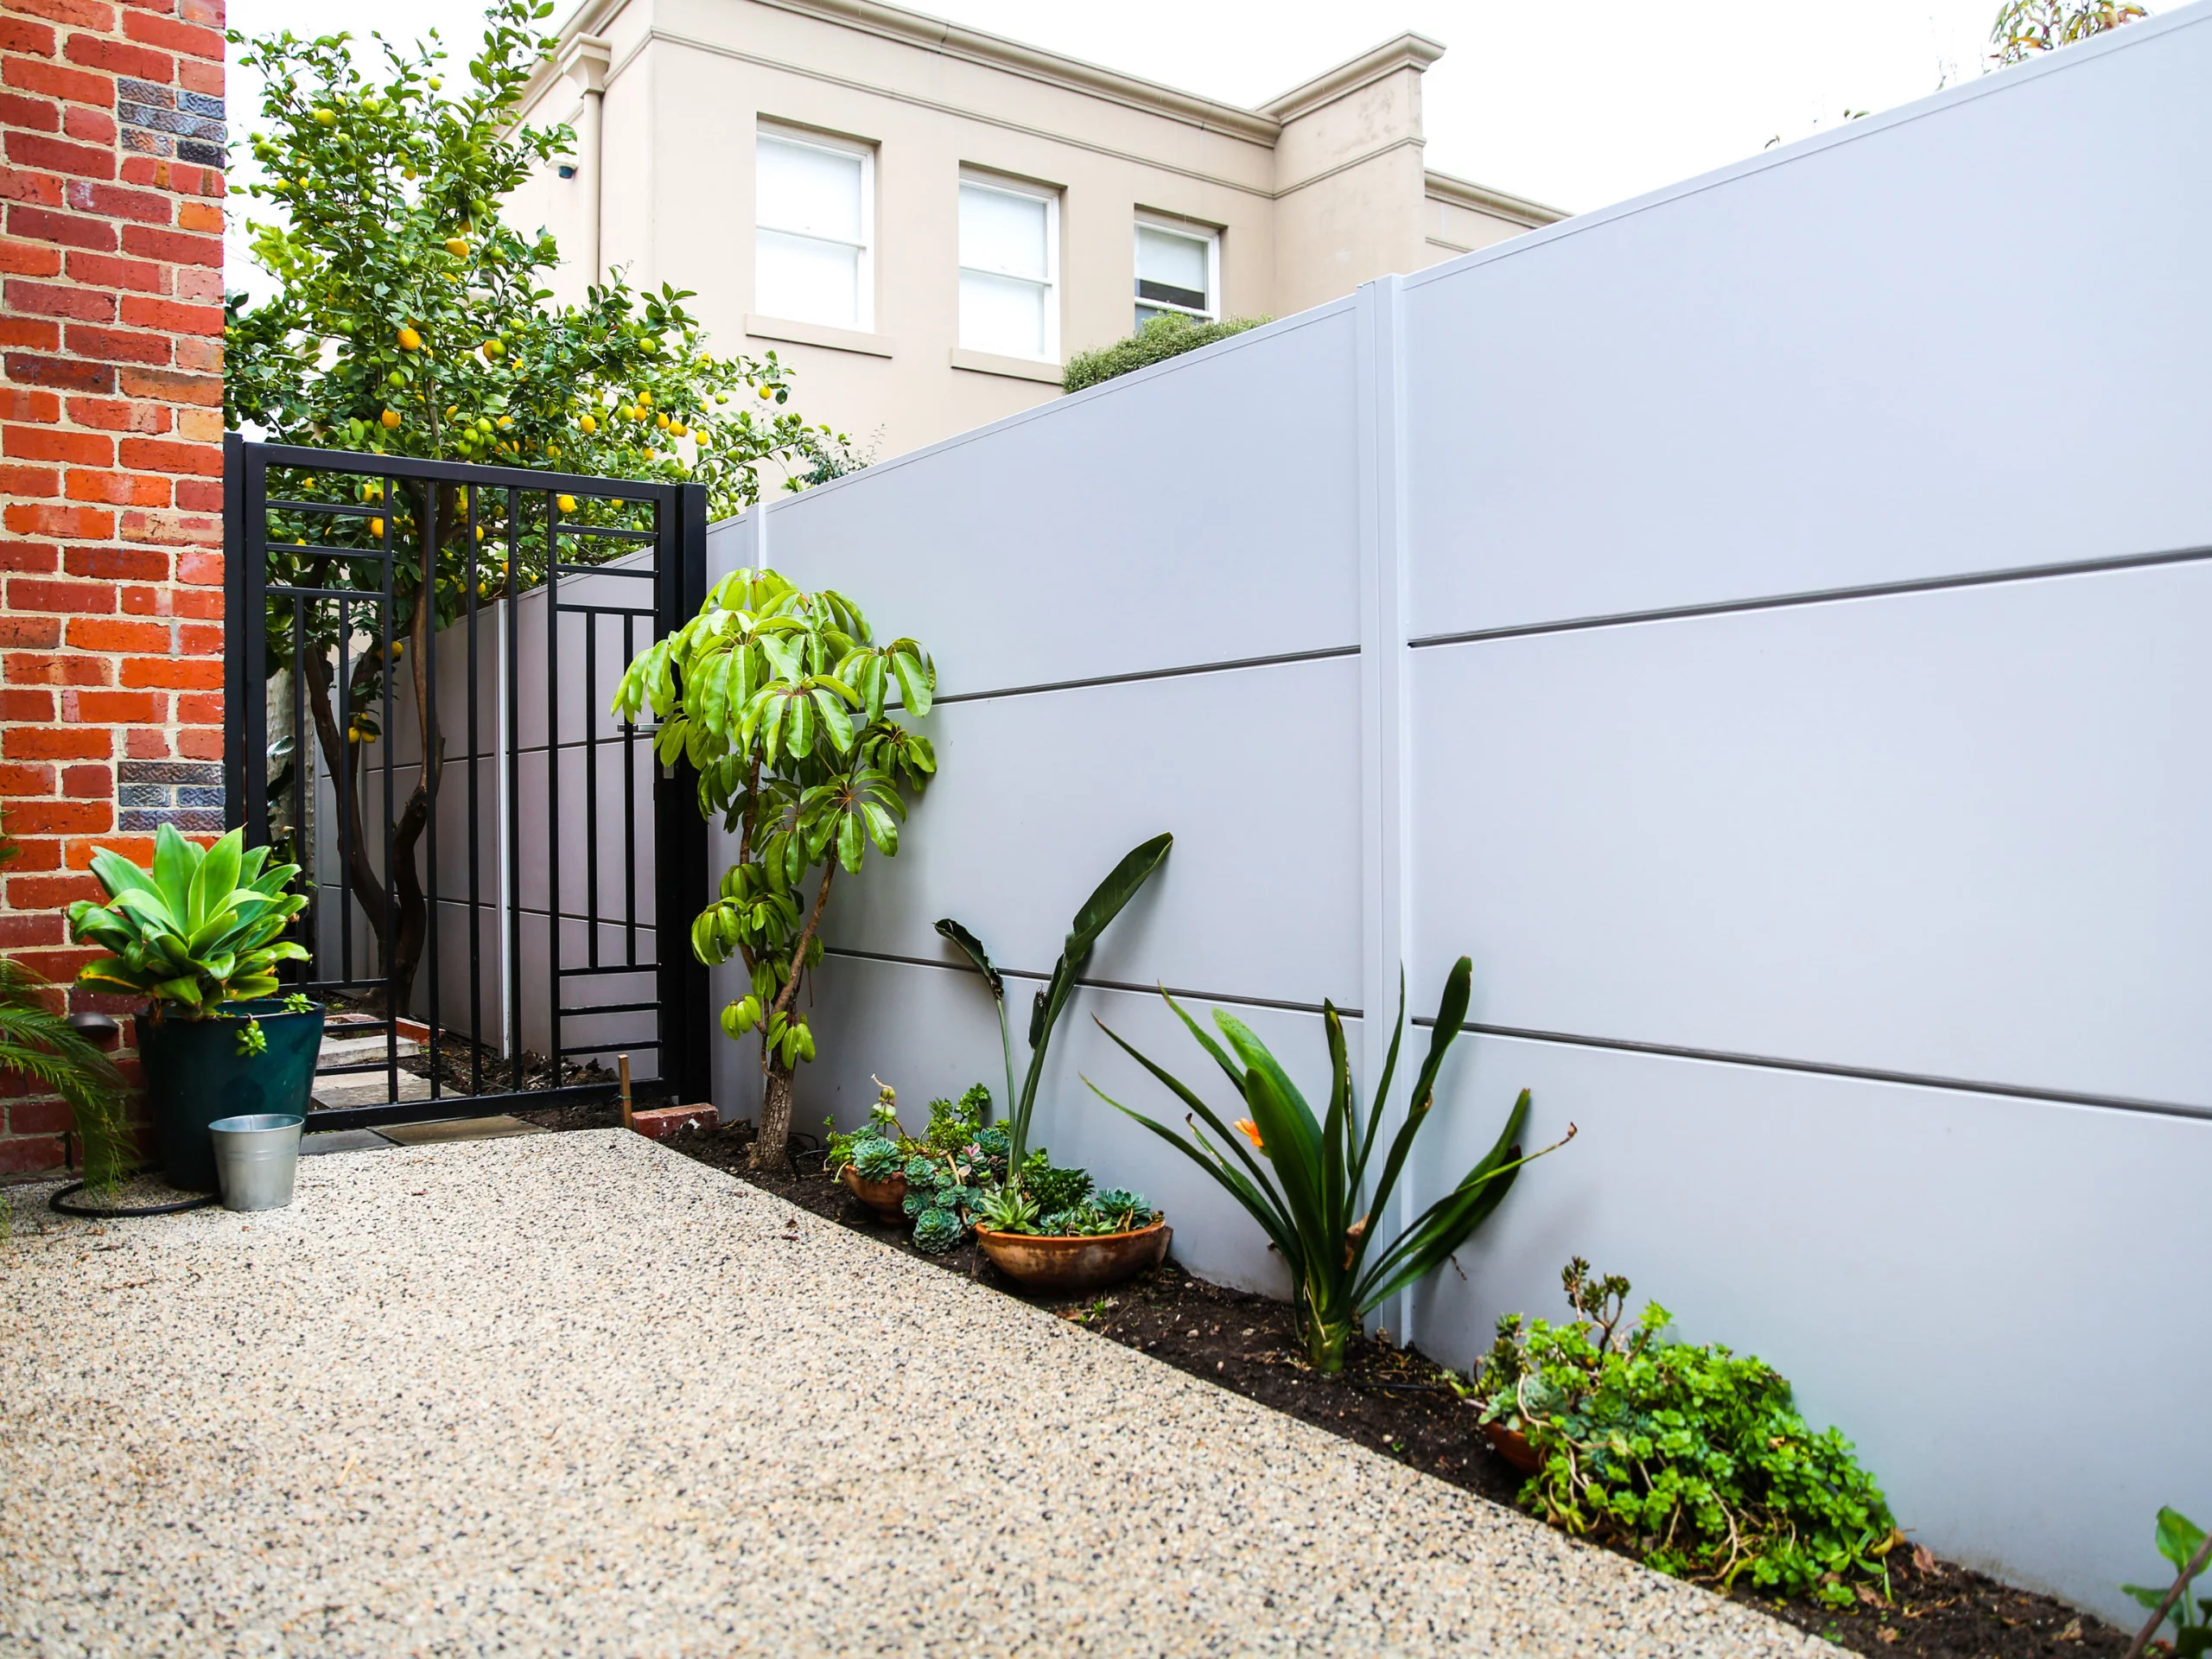 SlimWall with express joints | ModularWalls | Divding Fence Acts